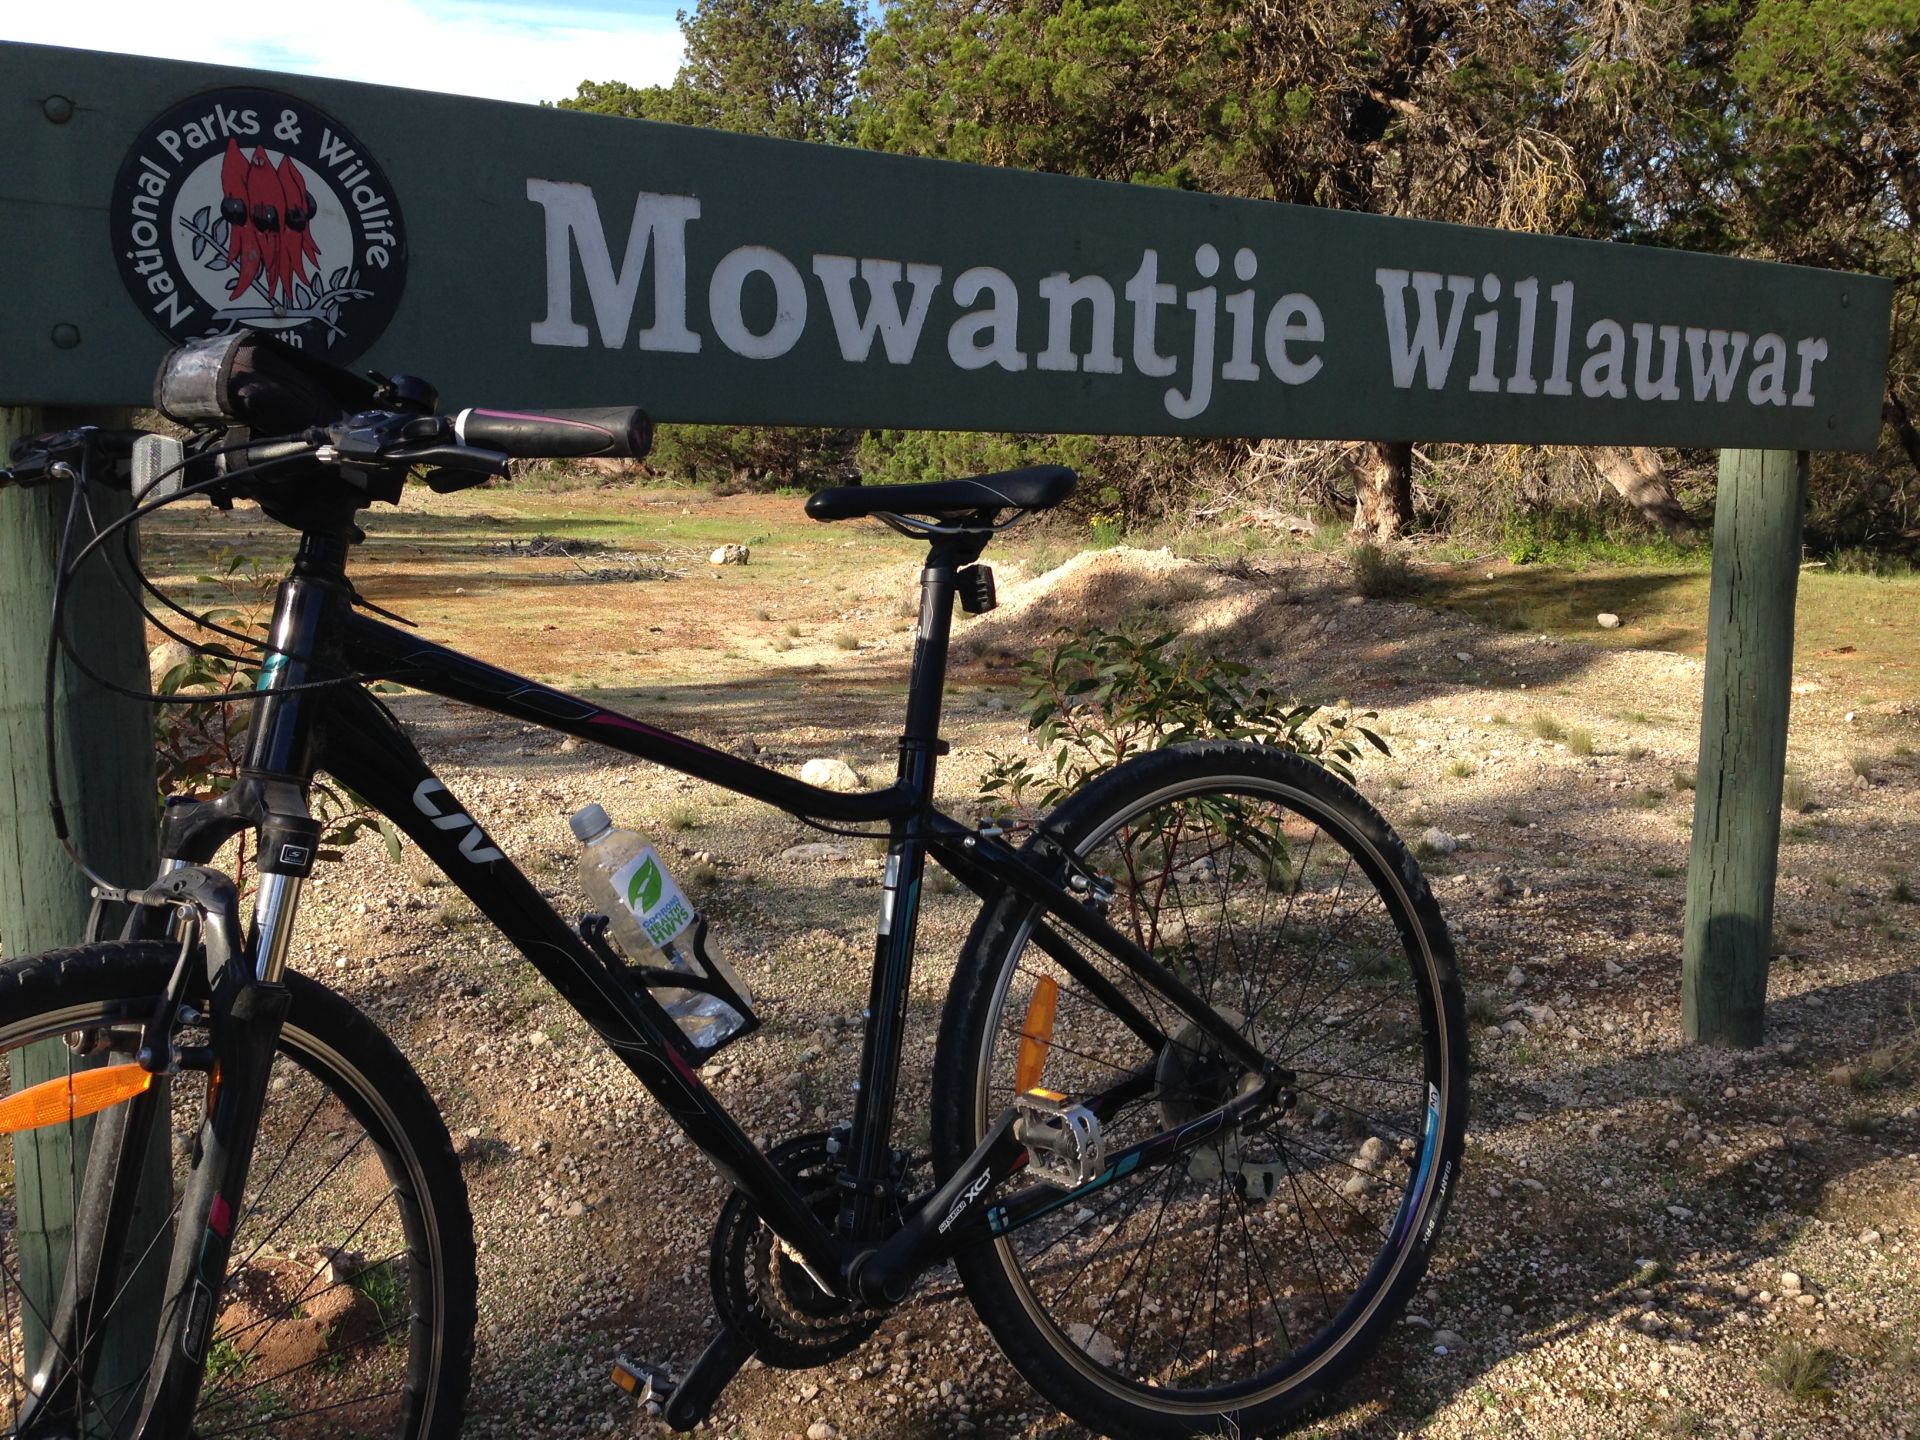 Mowantjie Willauwar Sign and bicycle